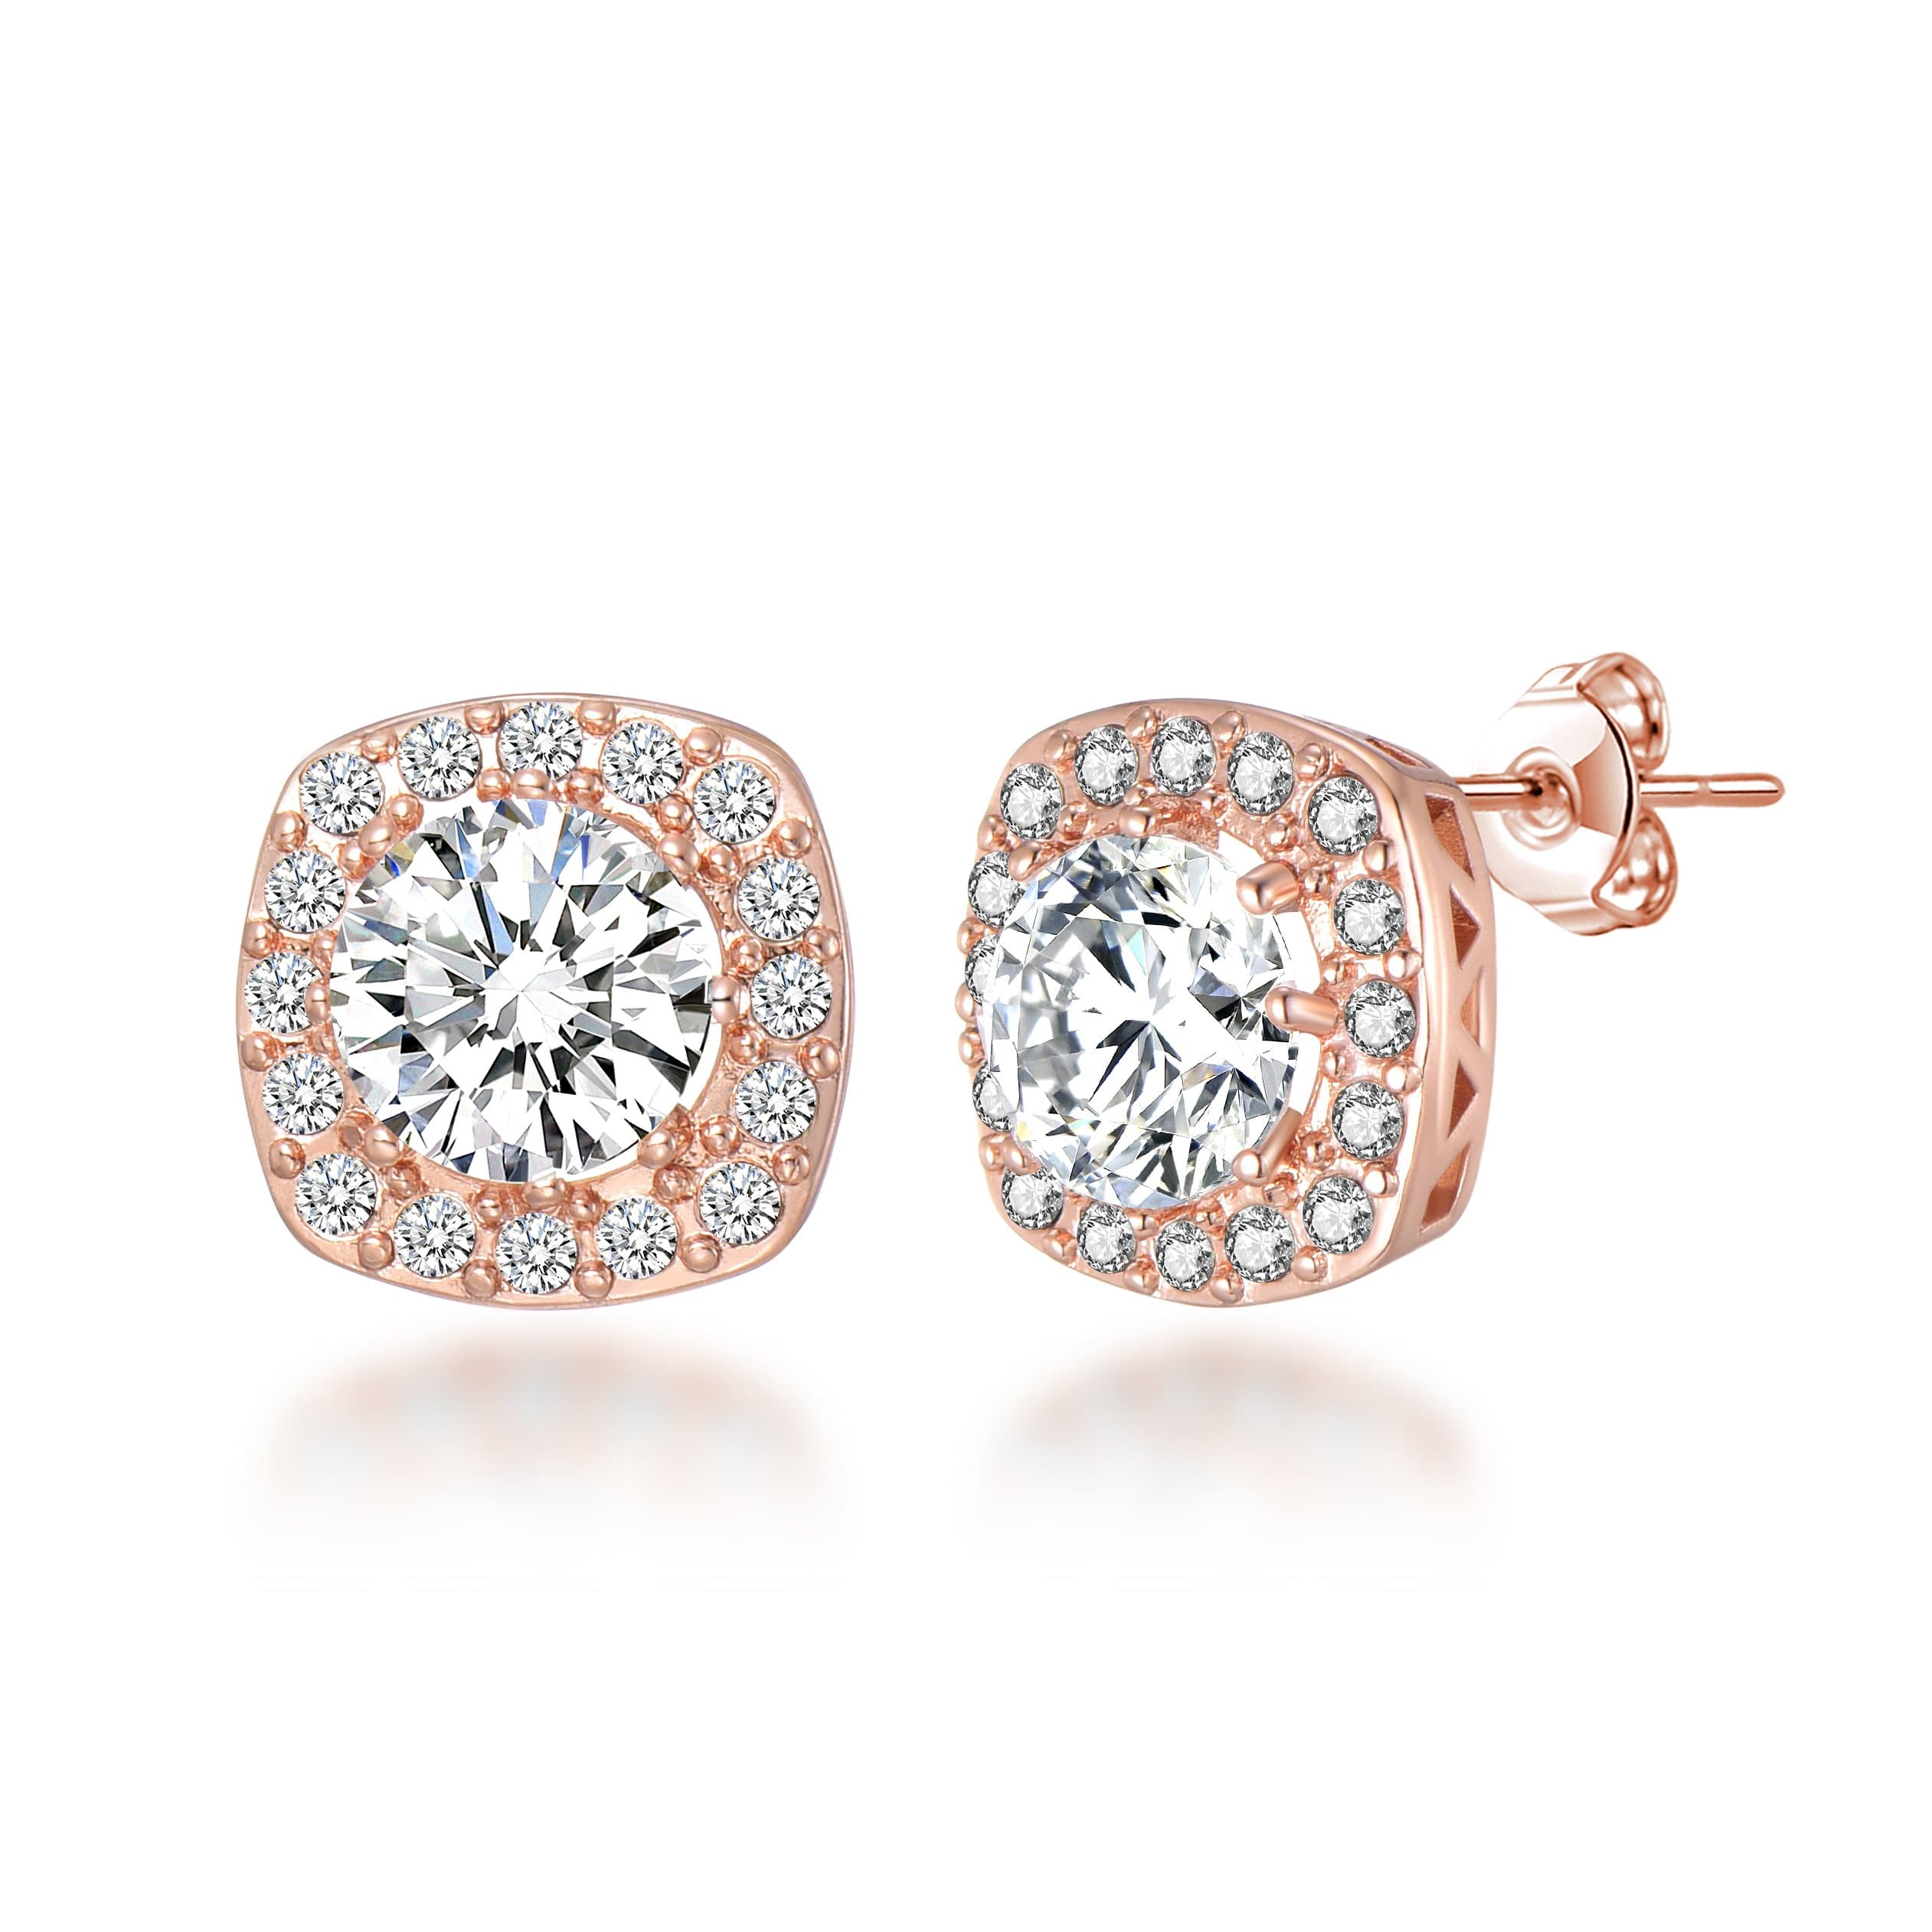 Rose Gold Plated Square Halo Earrings Created with Zircondia® Crystals by Philip Jones Jewellery